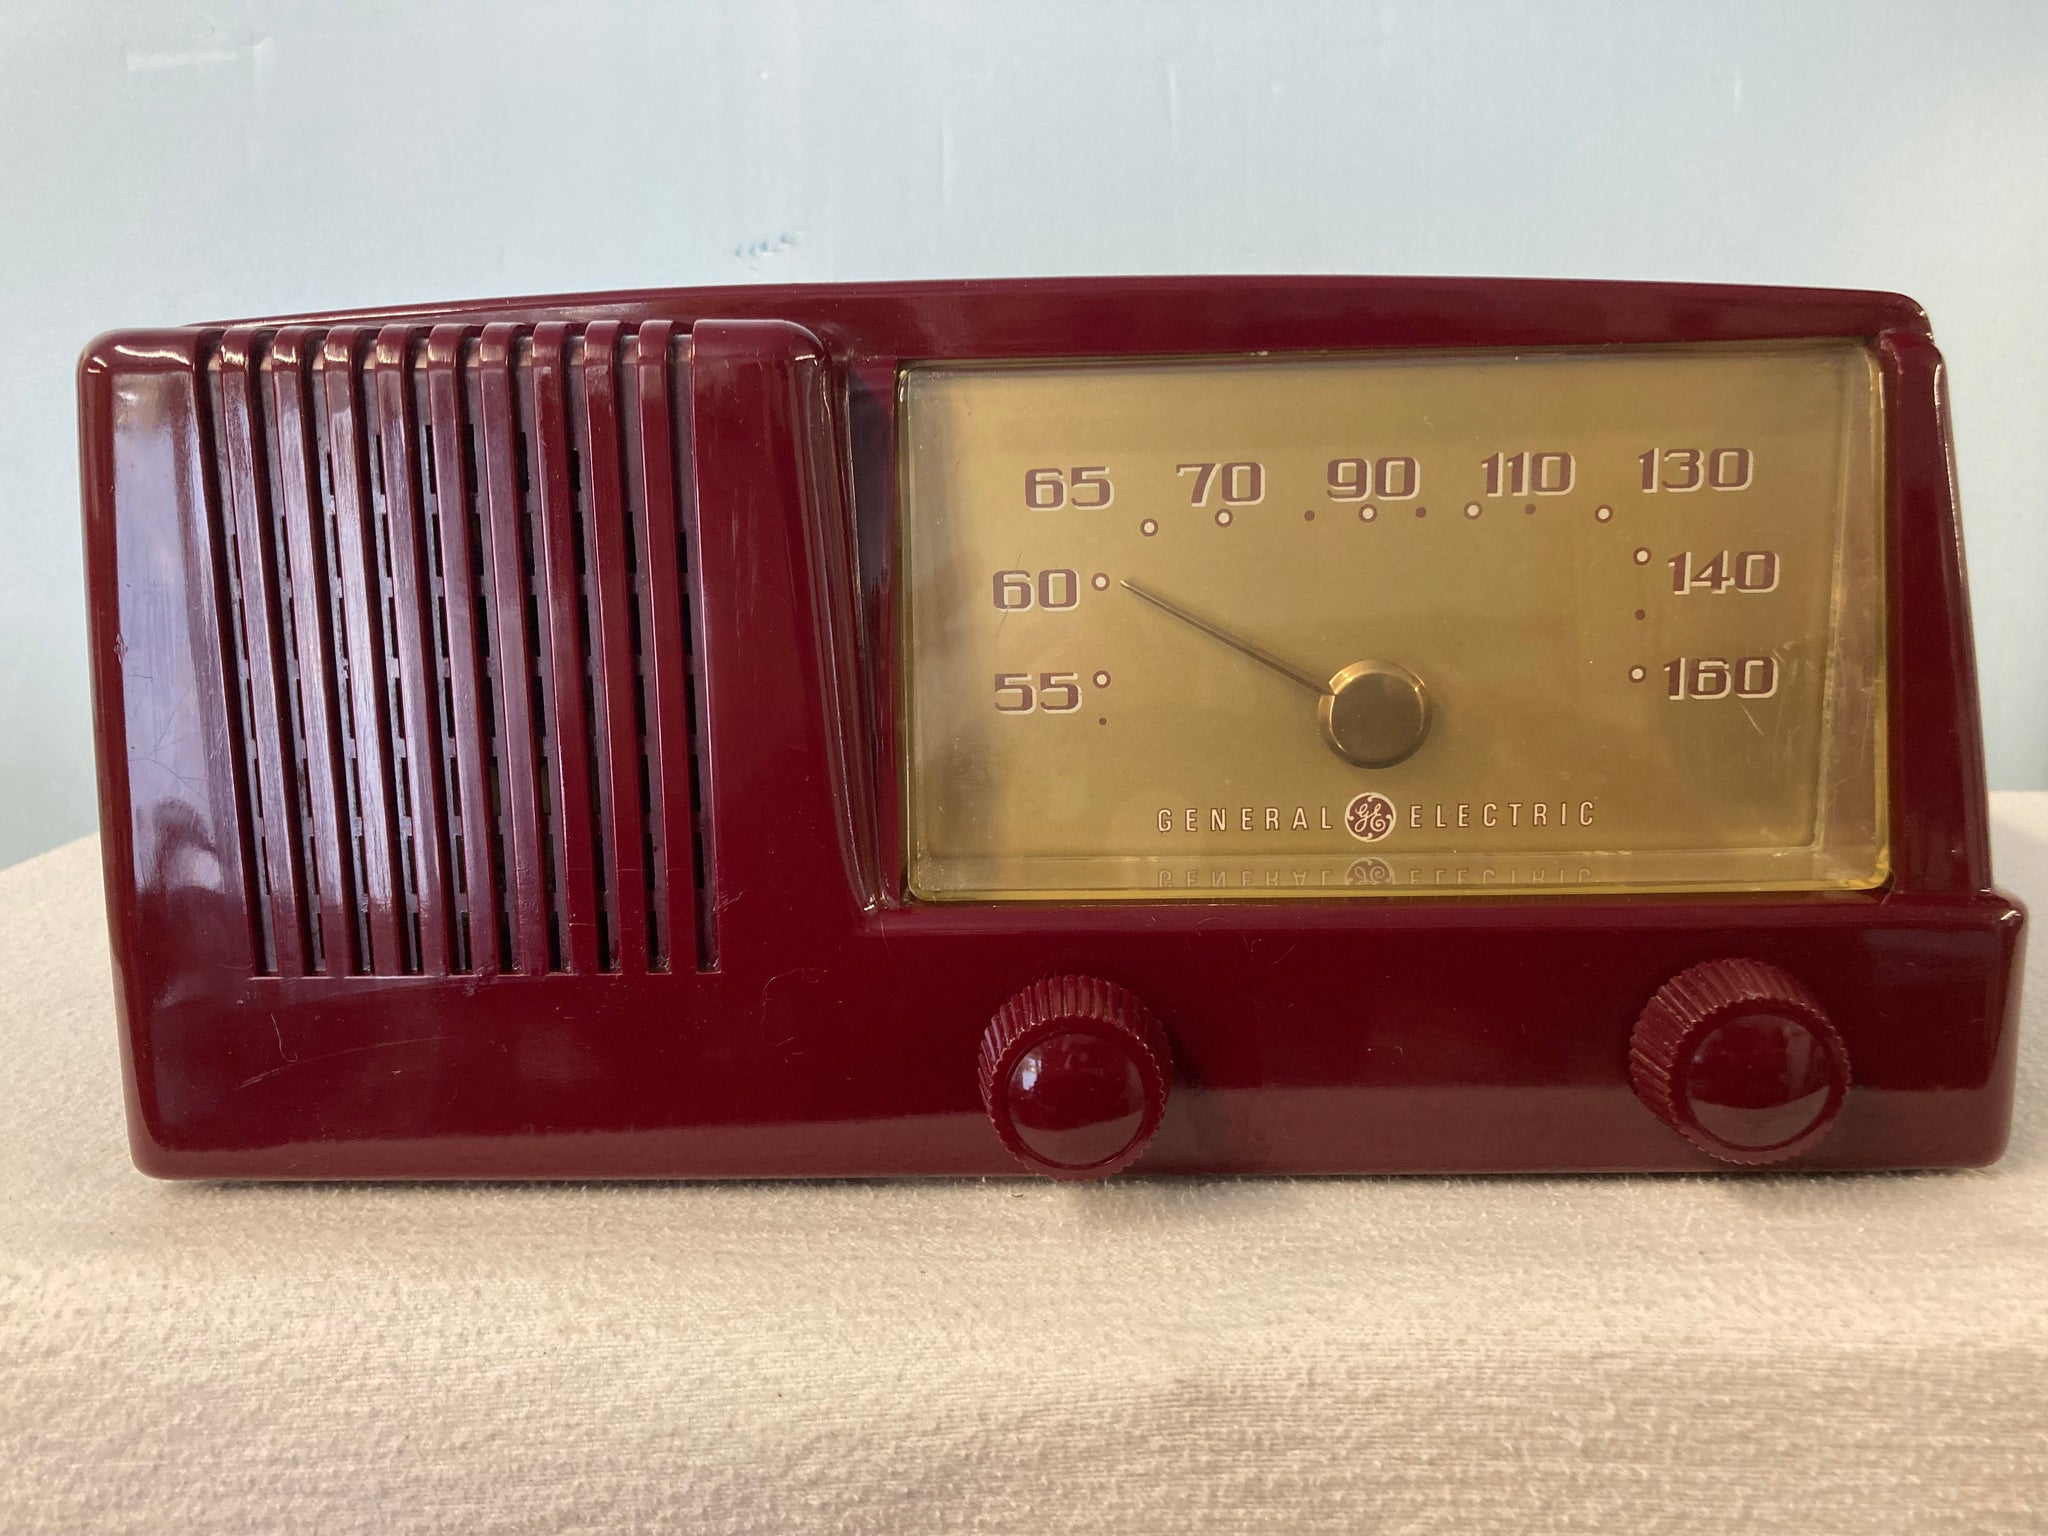 1950 General Electric model 125 Tube Radio With Bluetooth & FM Options ...